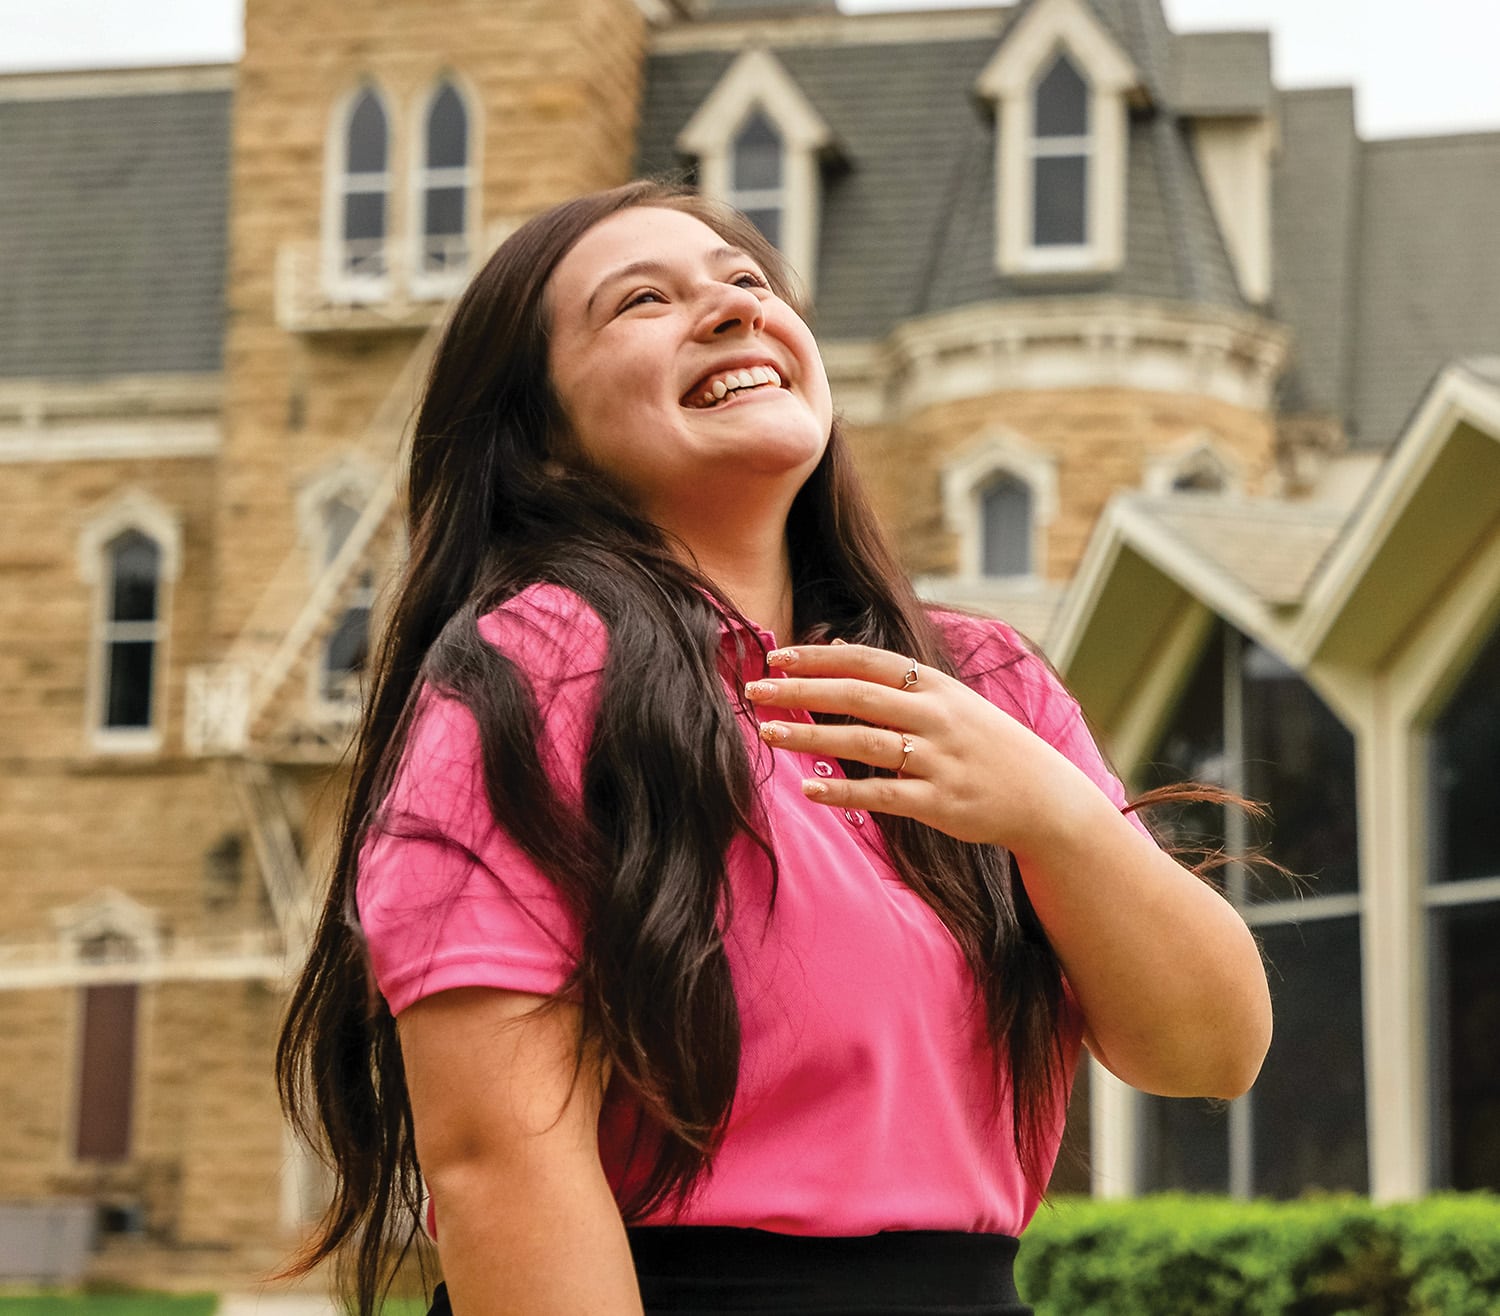 A joyful woman in a pink shirt laughing outdoors with Howard Payne University in the background. | HPU